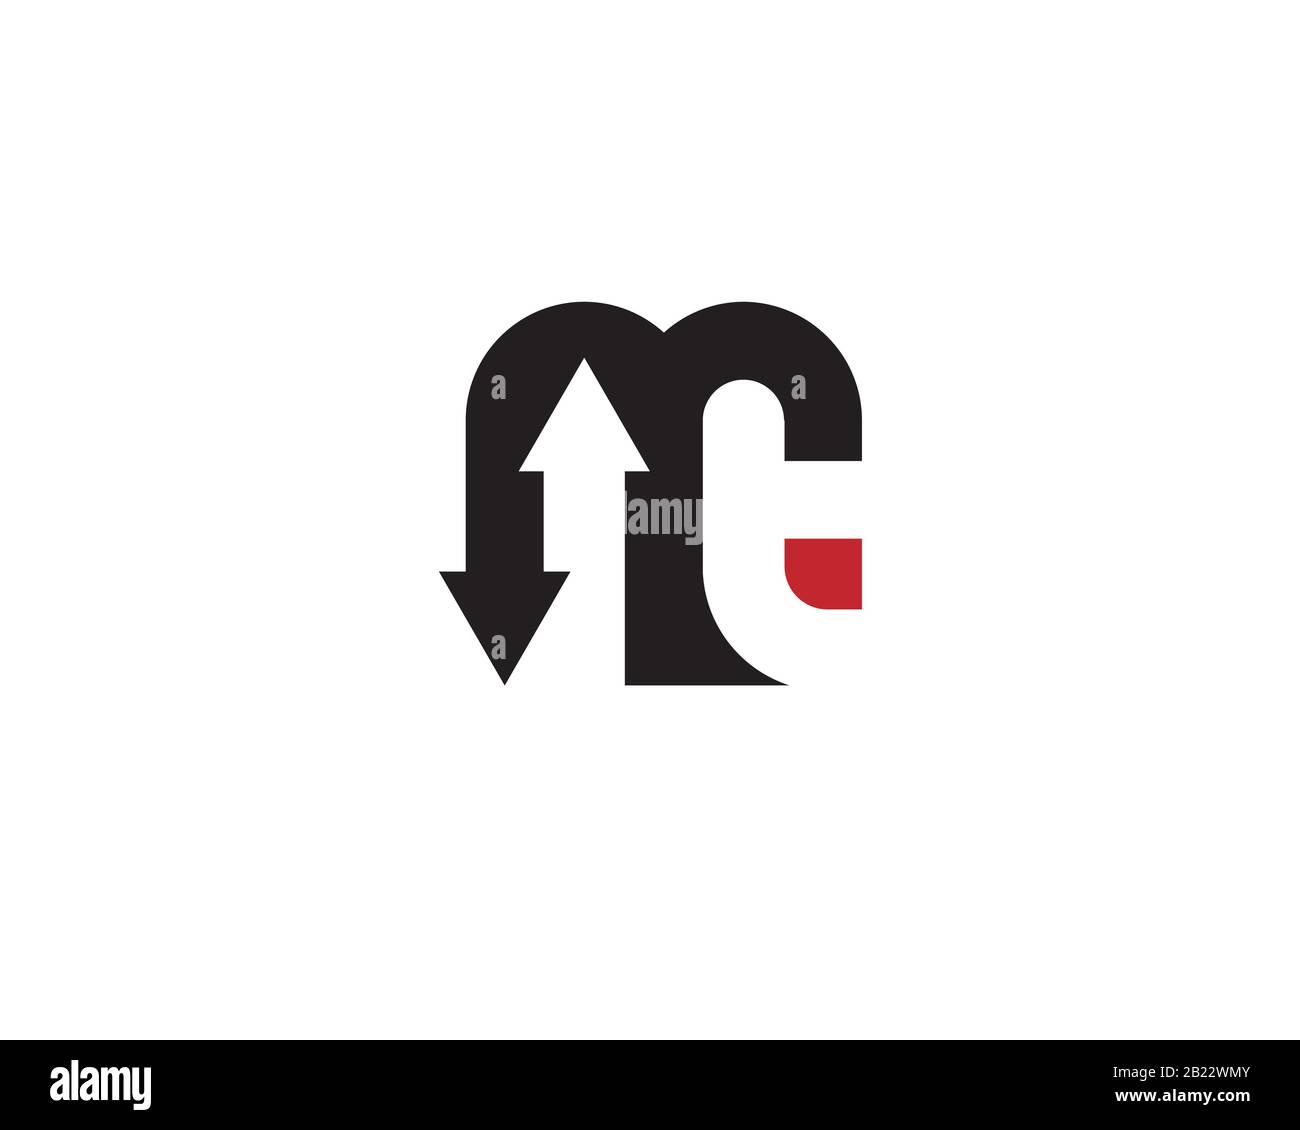 monogram anagram lettermark logo of letter m i n t with up and down arrows head Stock Vector